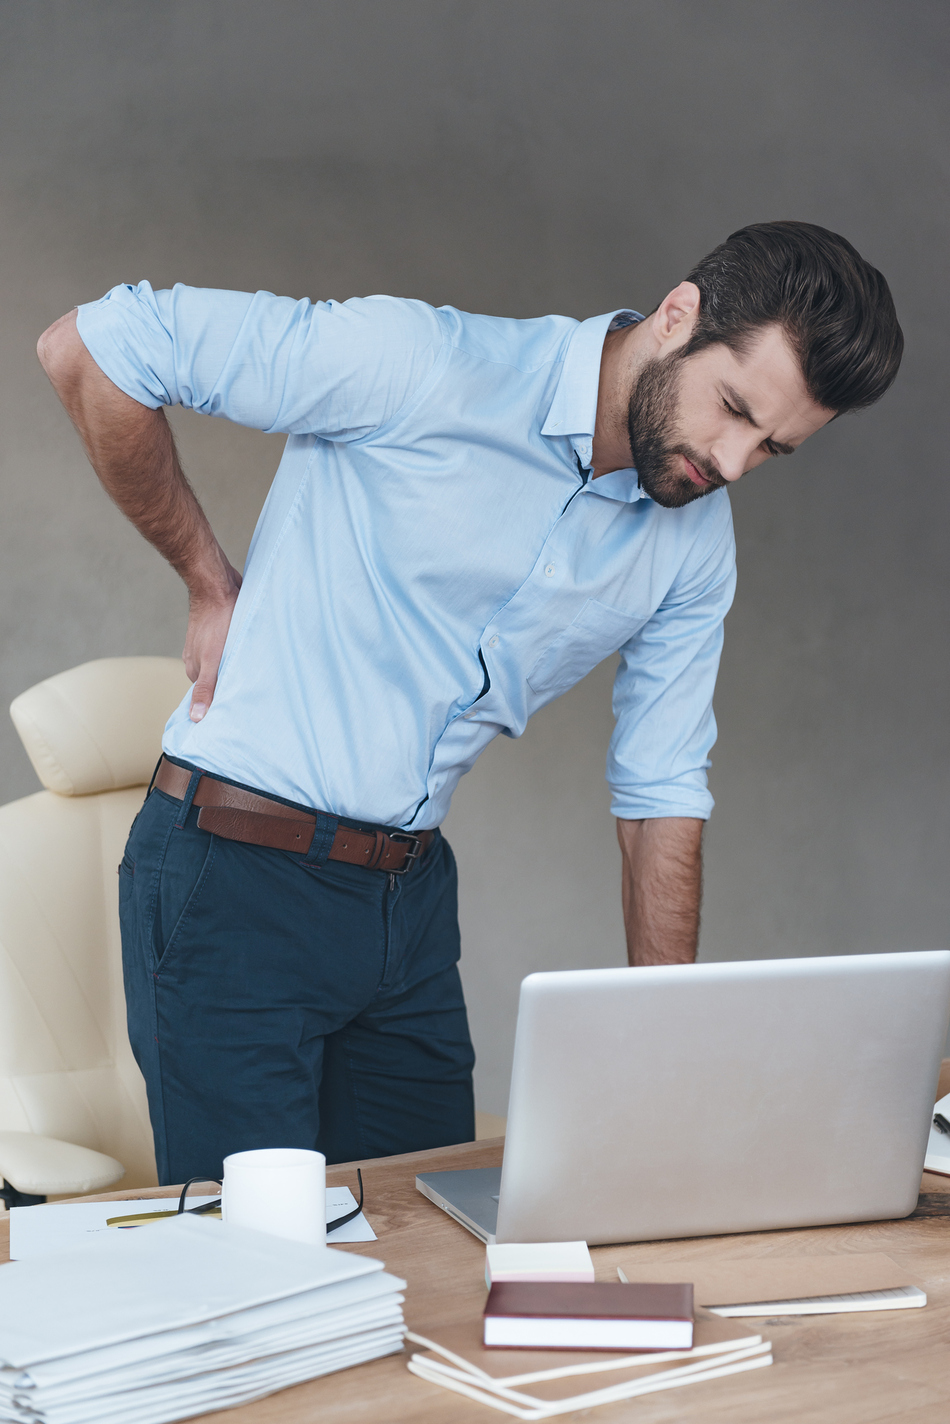 Sciatica? Maybe You’re Sitting Too Much